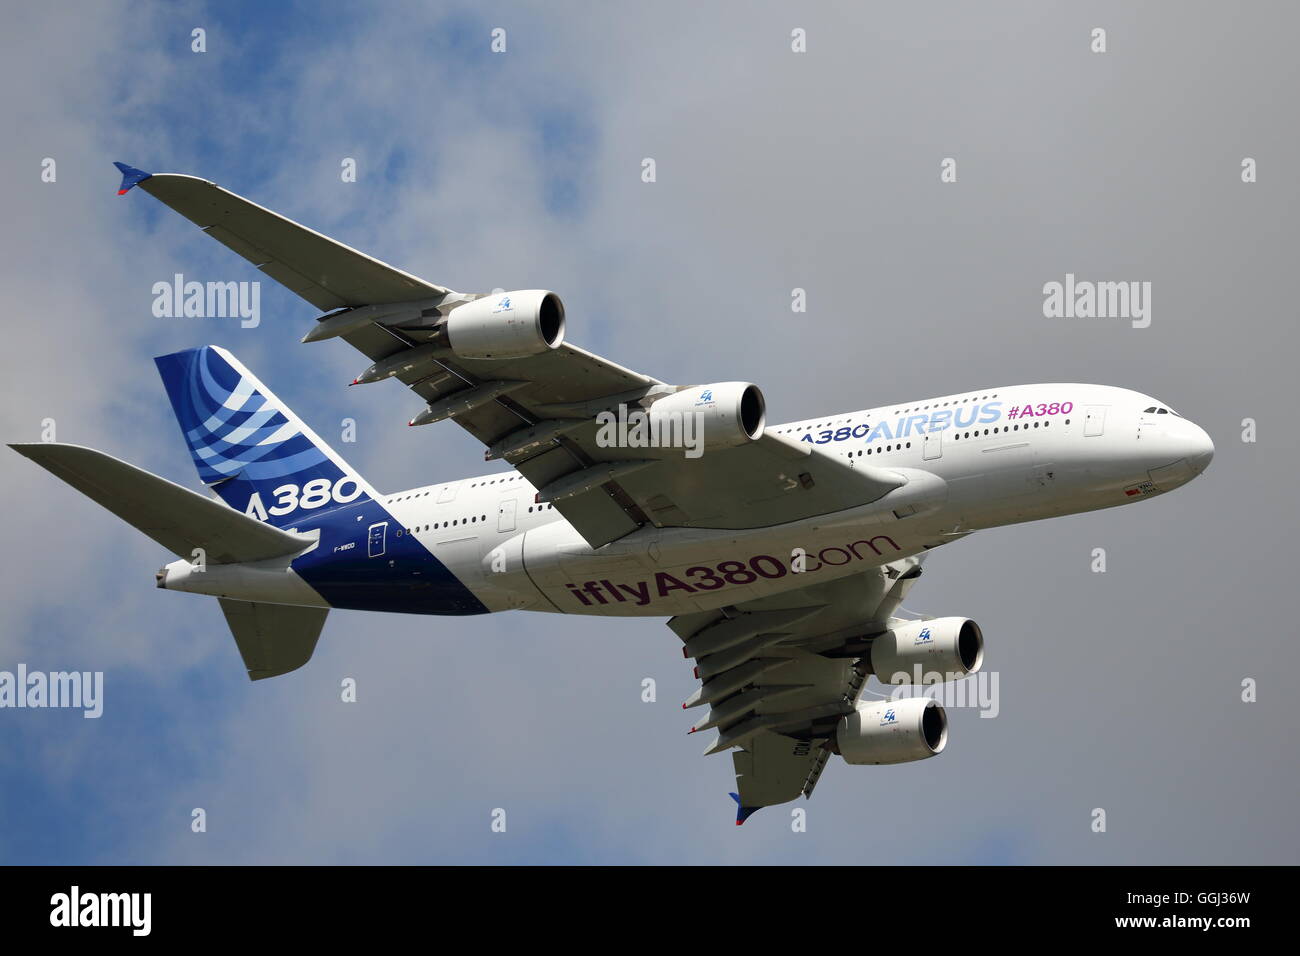 The Airbus A380 F-WWDD displayed its impressive maneuverability at the Farnborough Airshow Stock Photo